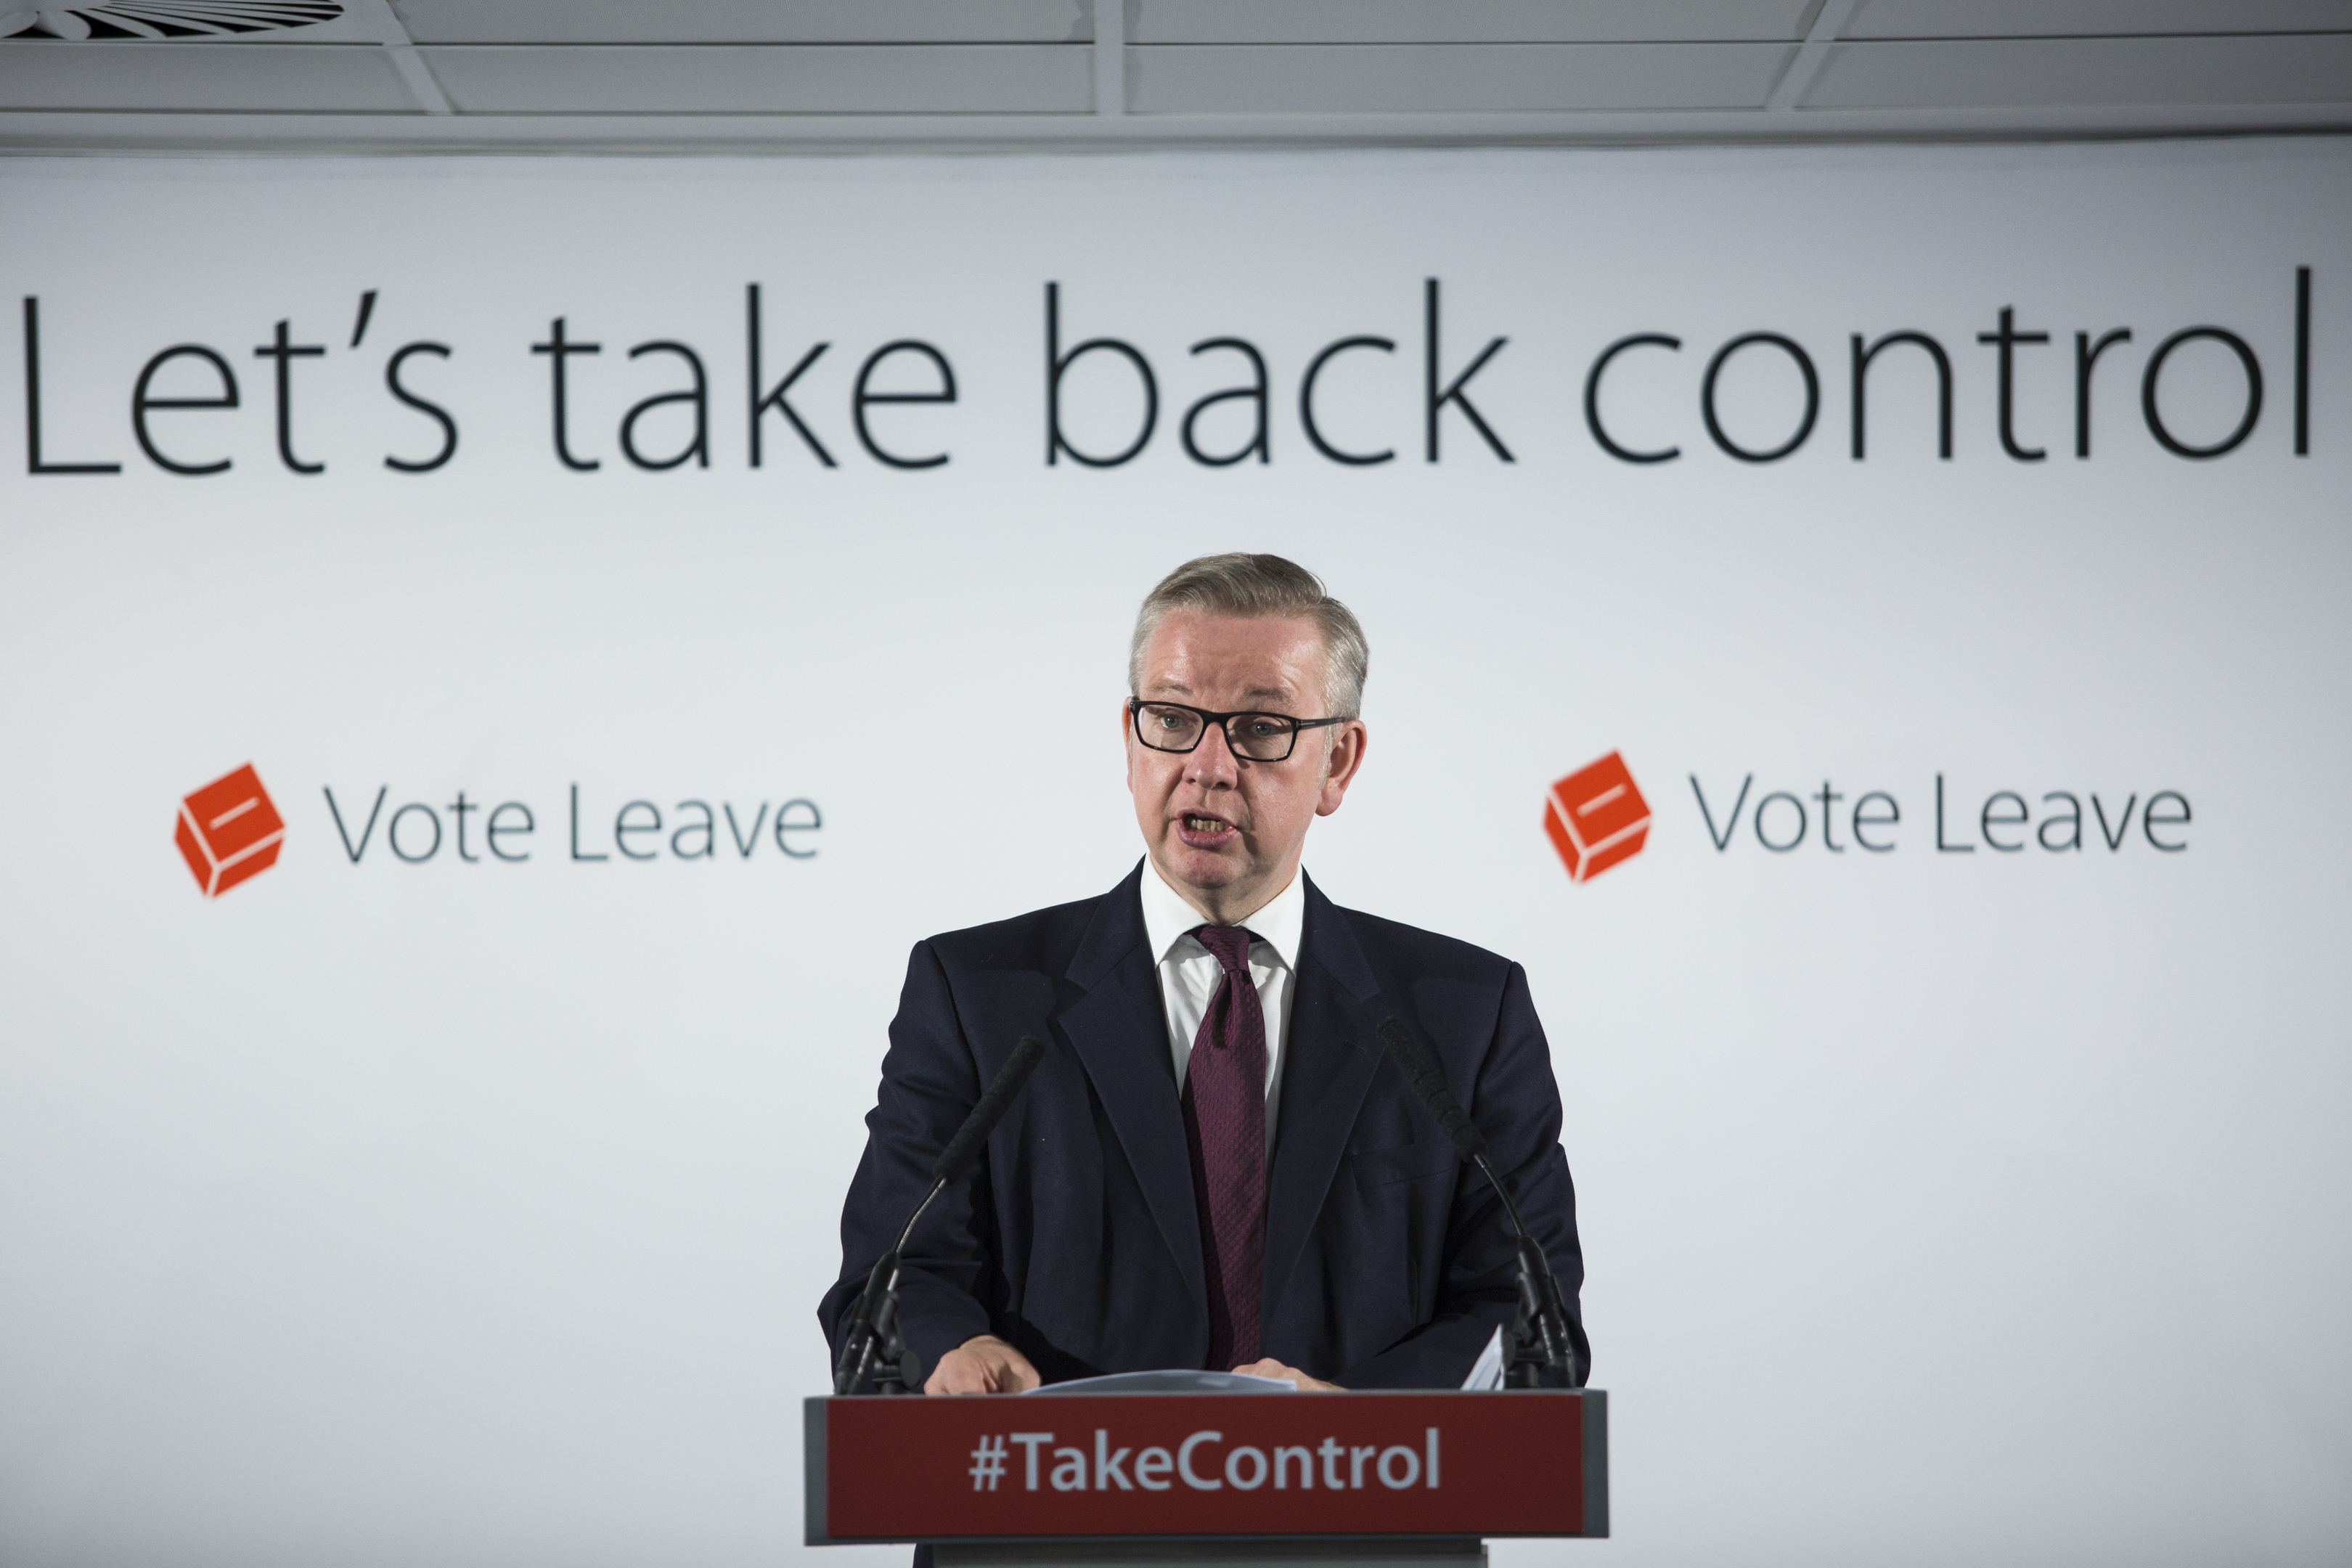 Justice Secretary MIchael Gove said Scotland could control its own immigration if the UK leaves the EU.